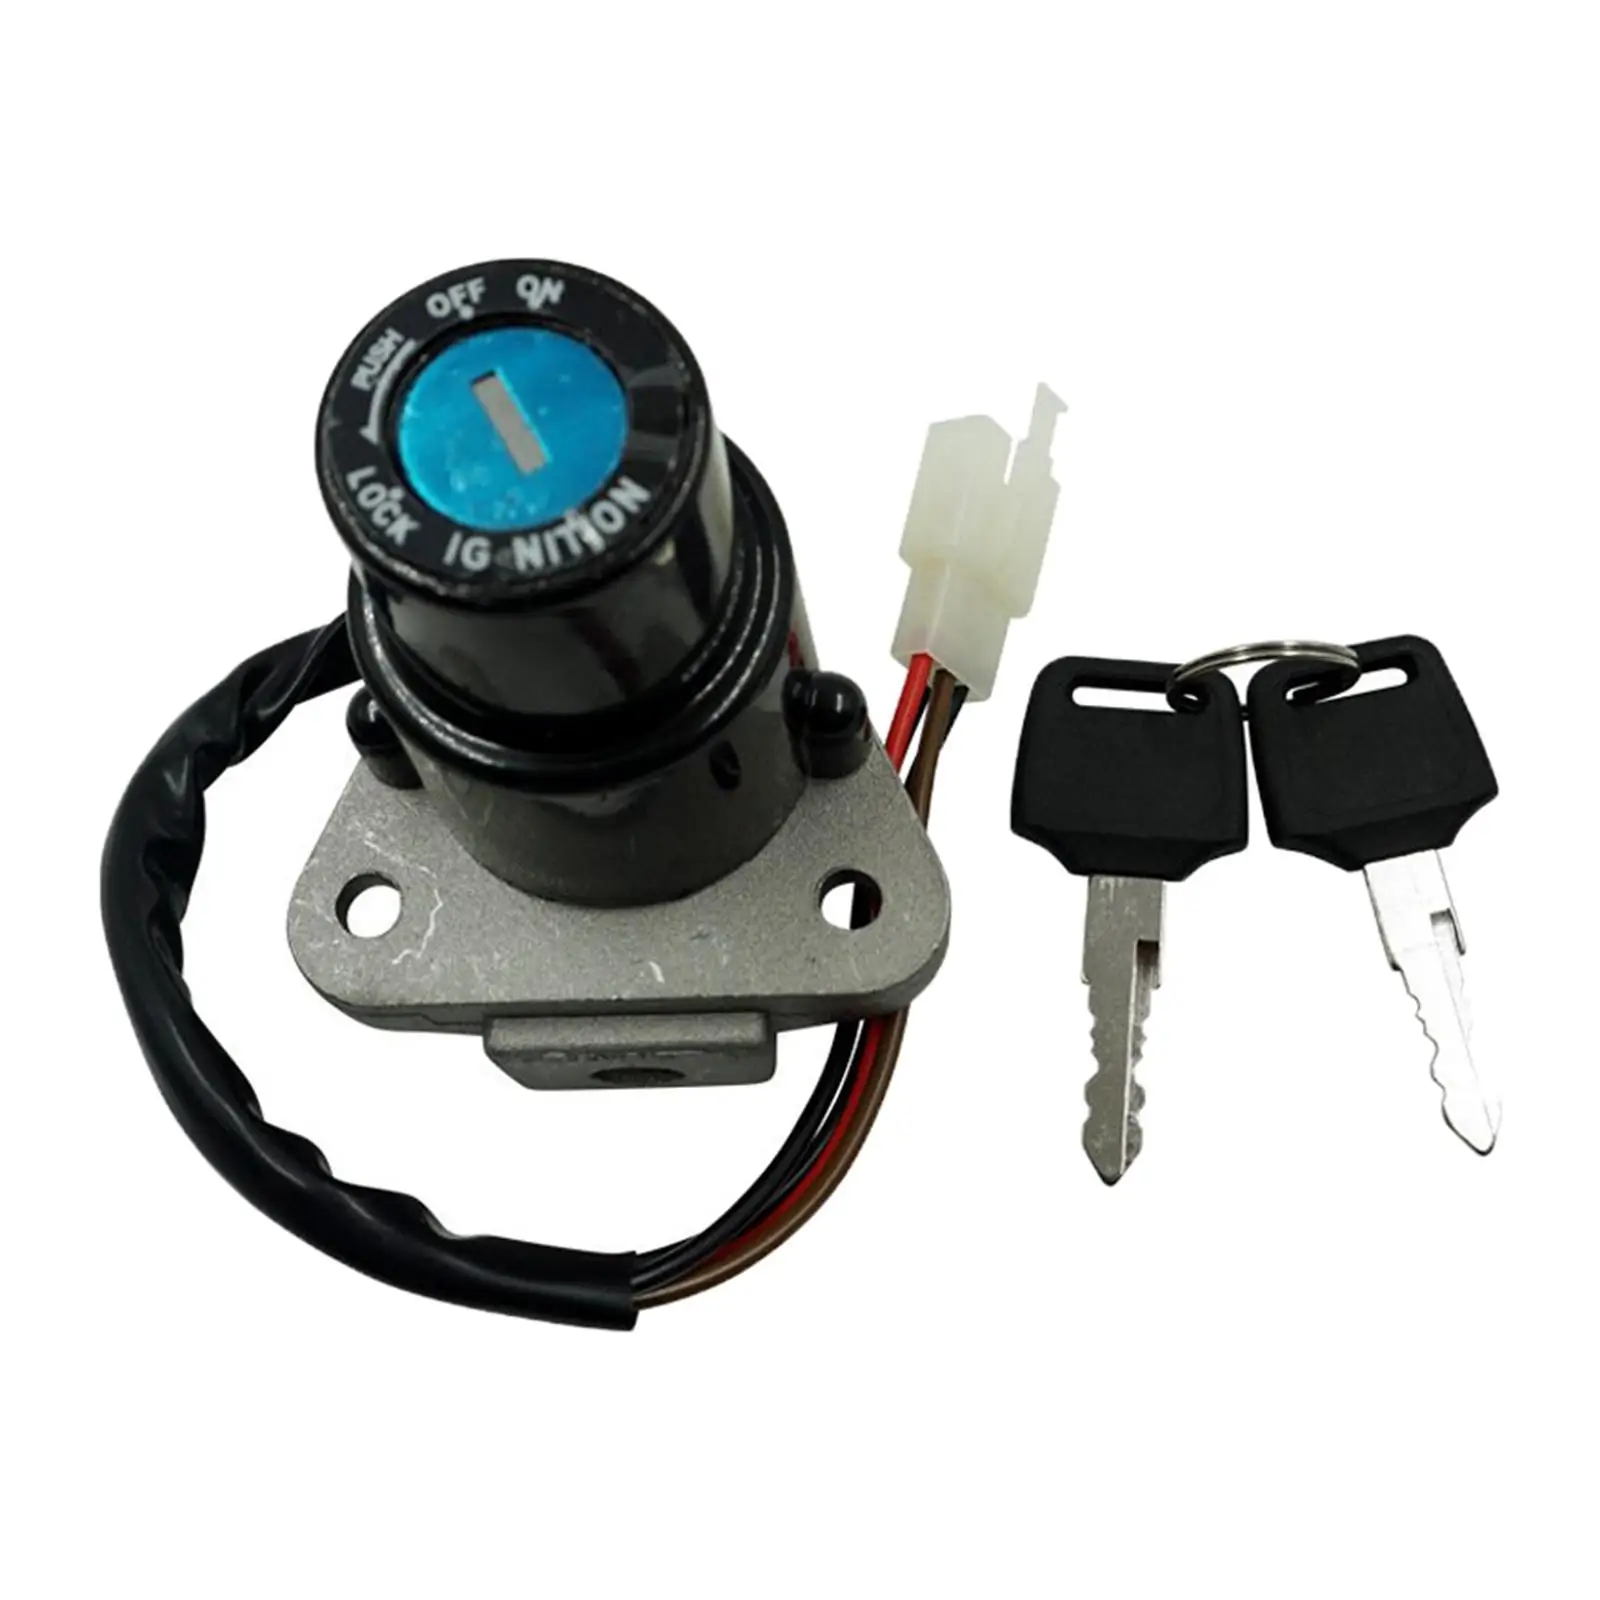 Motorcycle Ignition Switch Key Accessory Fit for Yamaha DT125 XT225 TW200